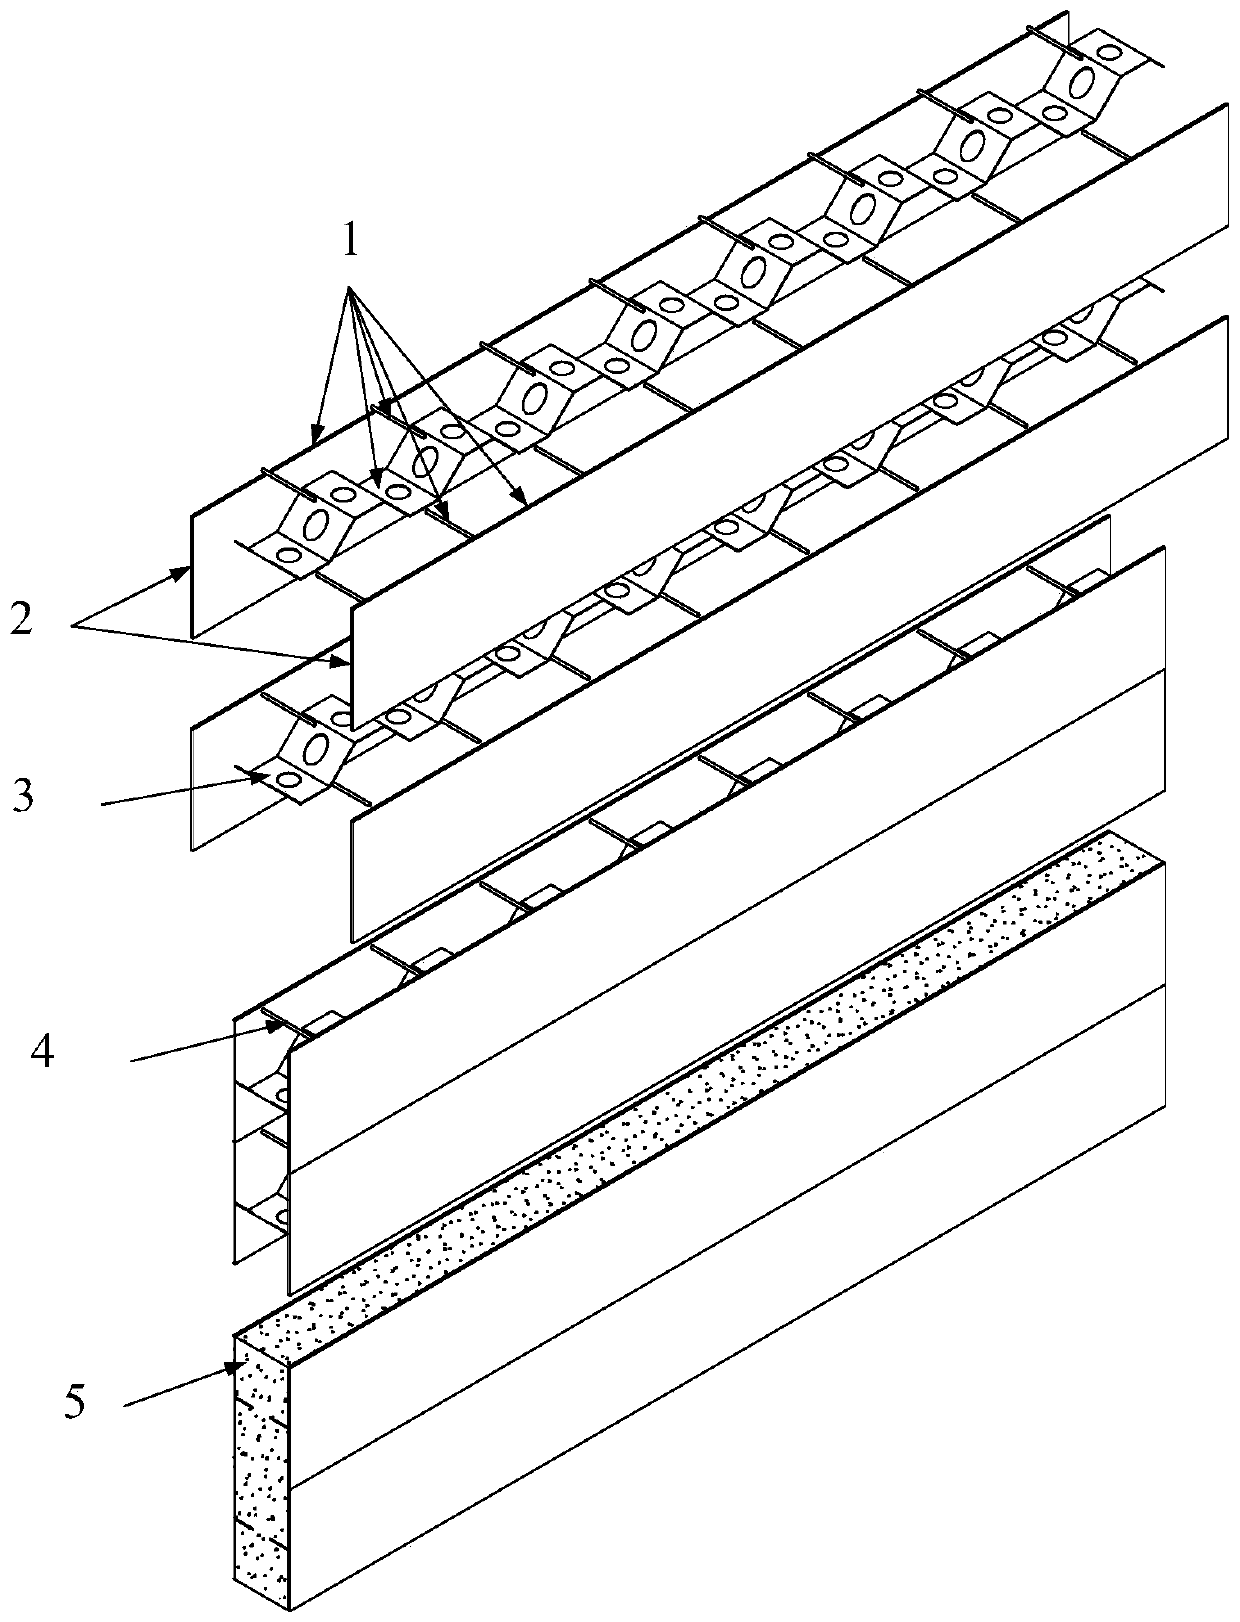 Double-layer steel plate combined shear wall with transverse hole-forming corrugated web